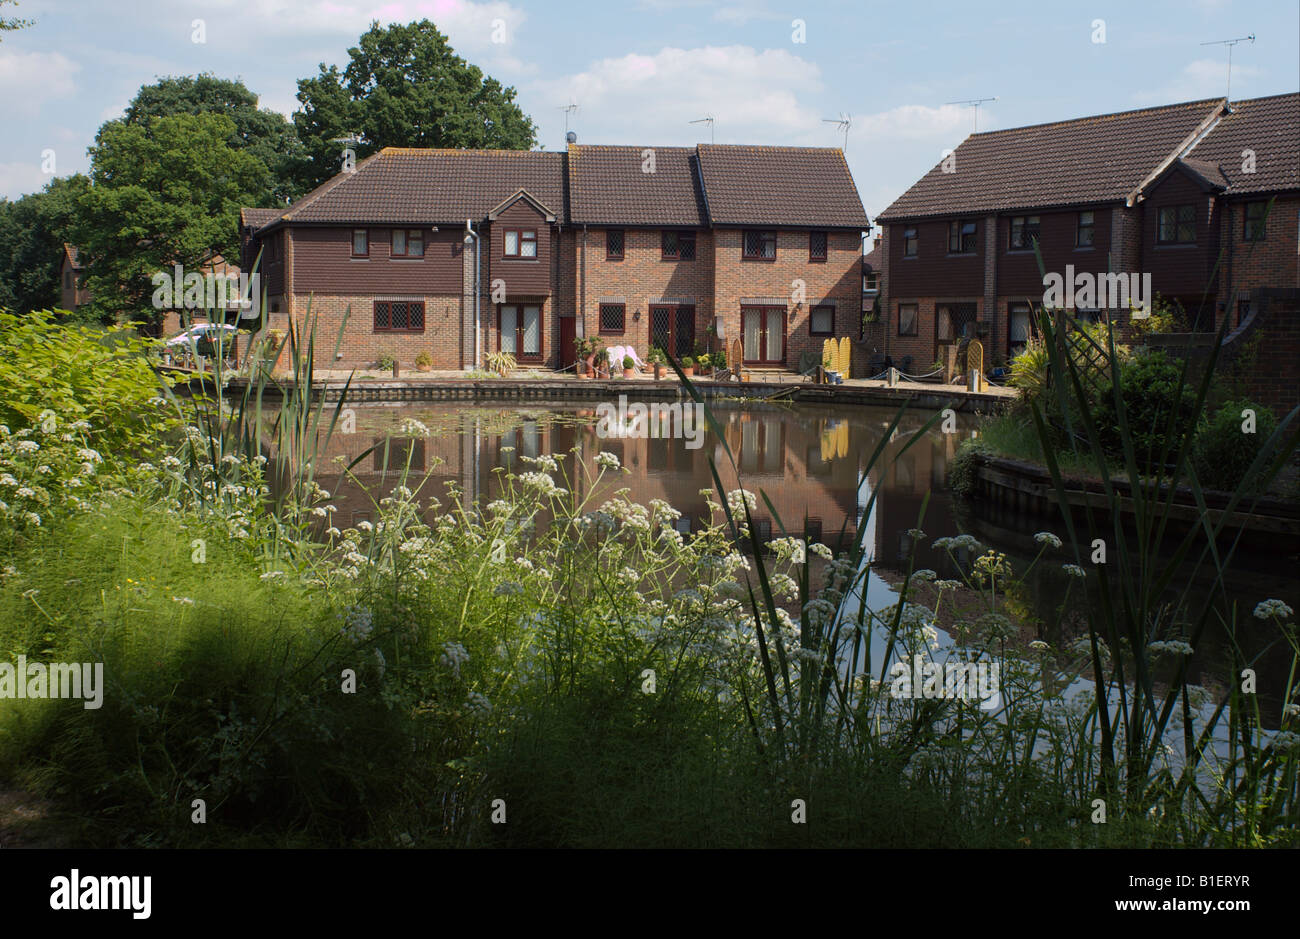 Water side apartment flats on the Basingstoke Canal Woking Surrey England Stock Photo